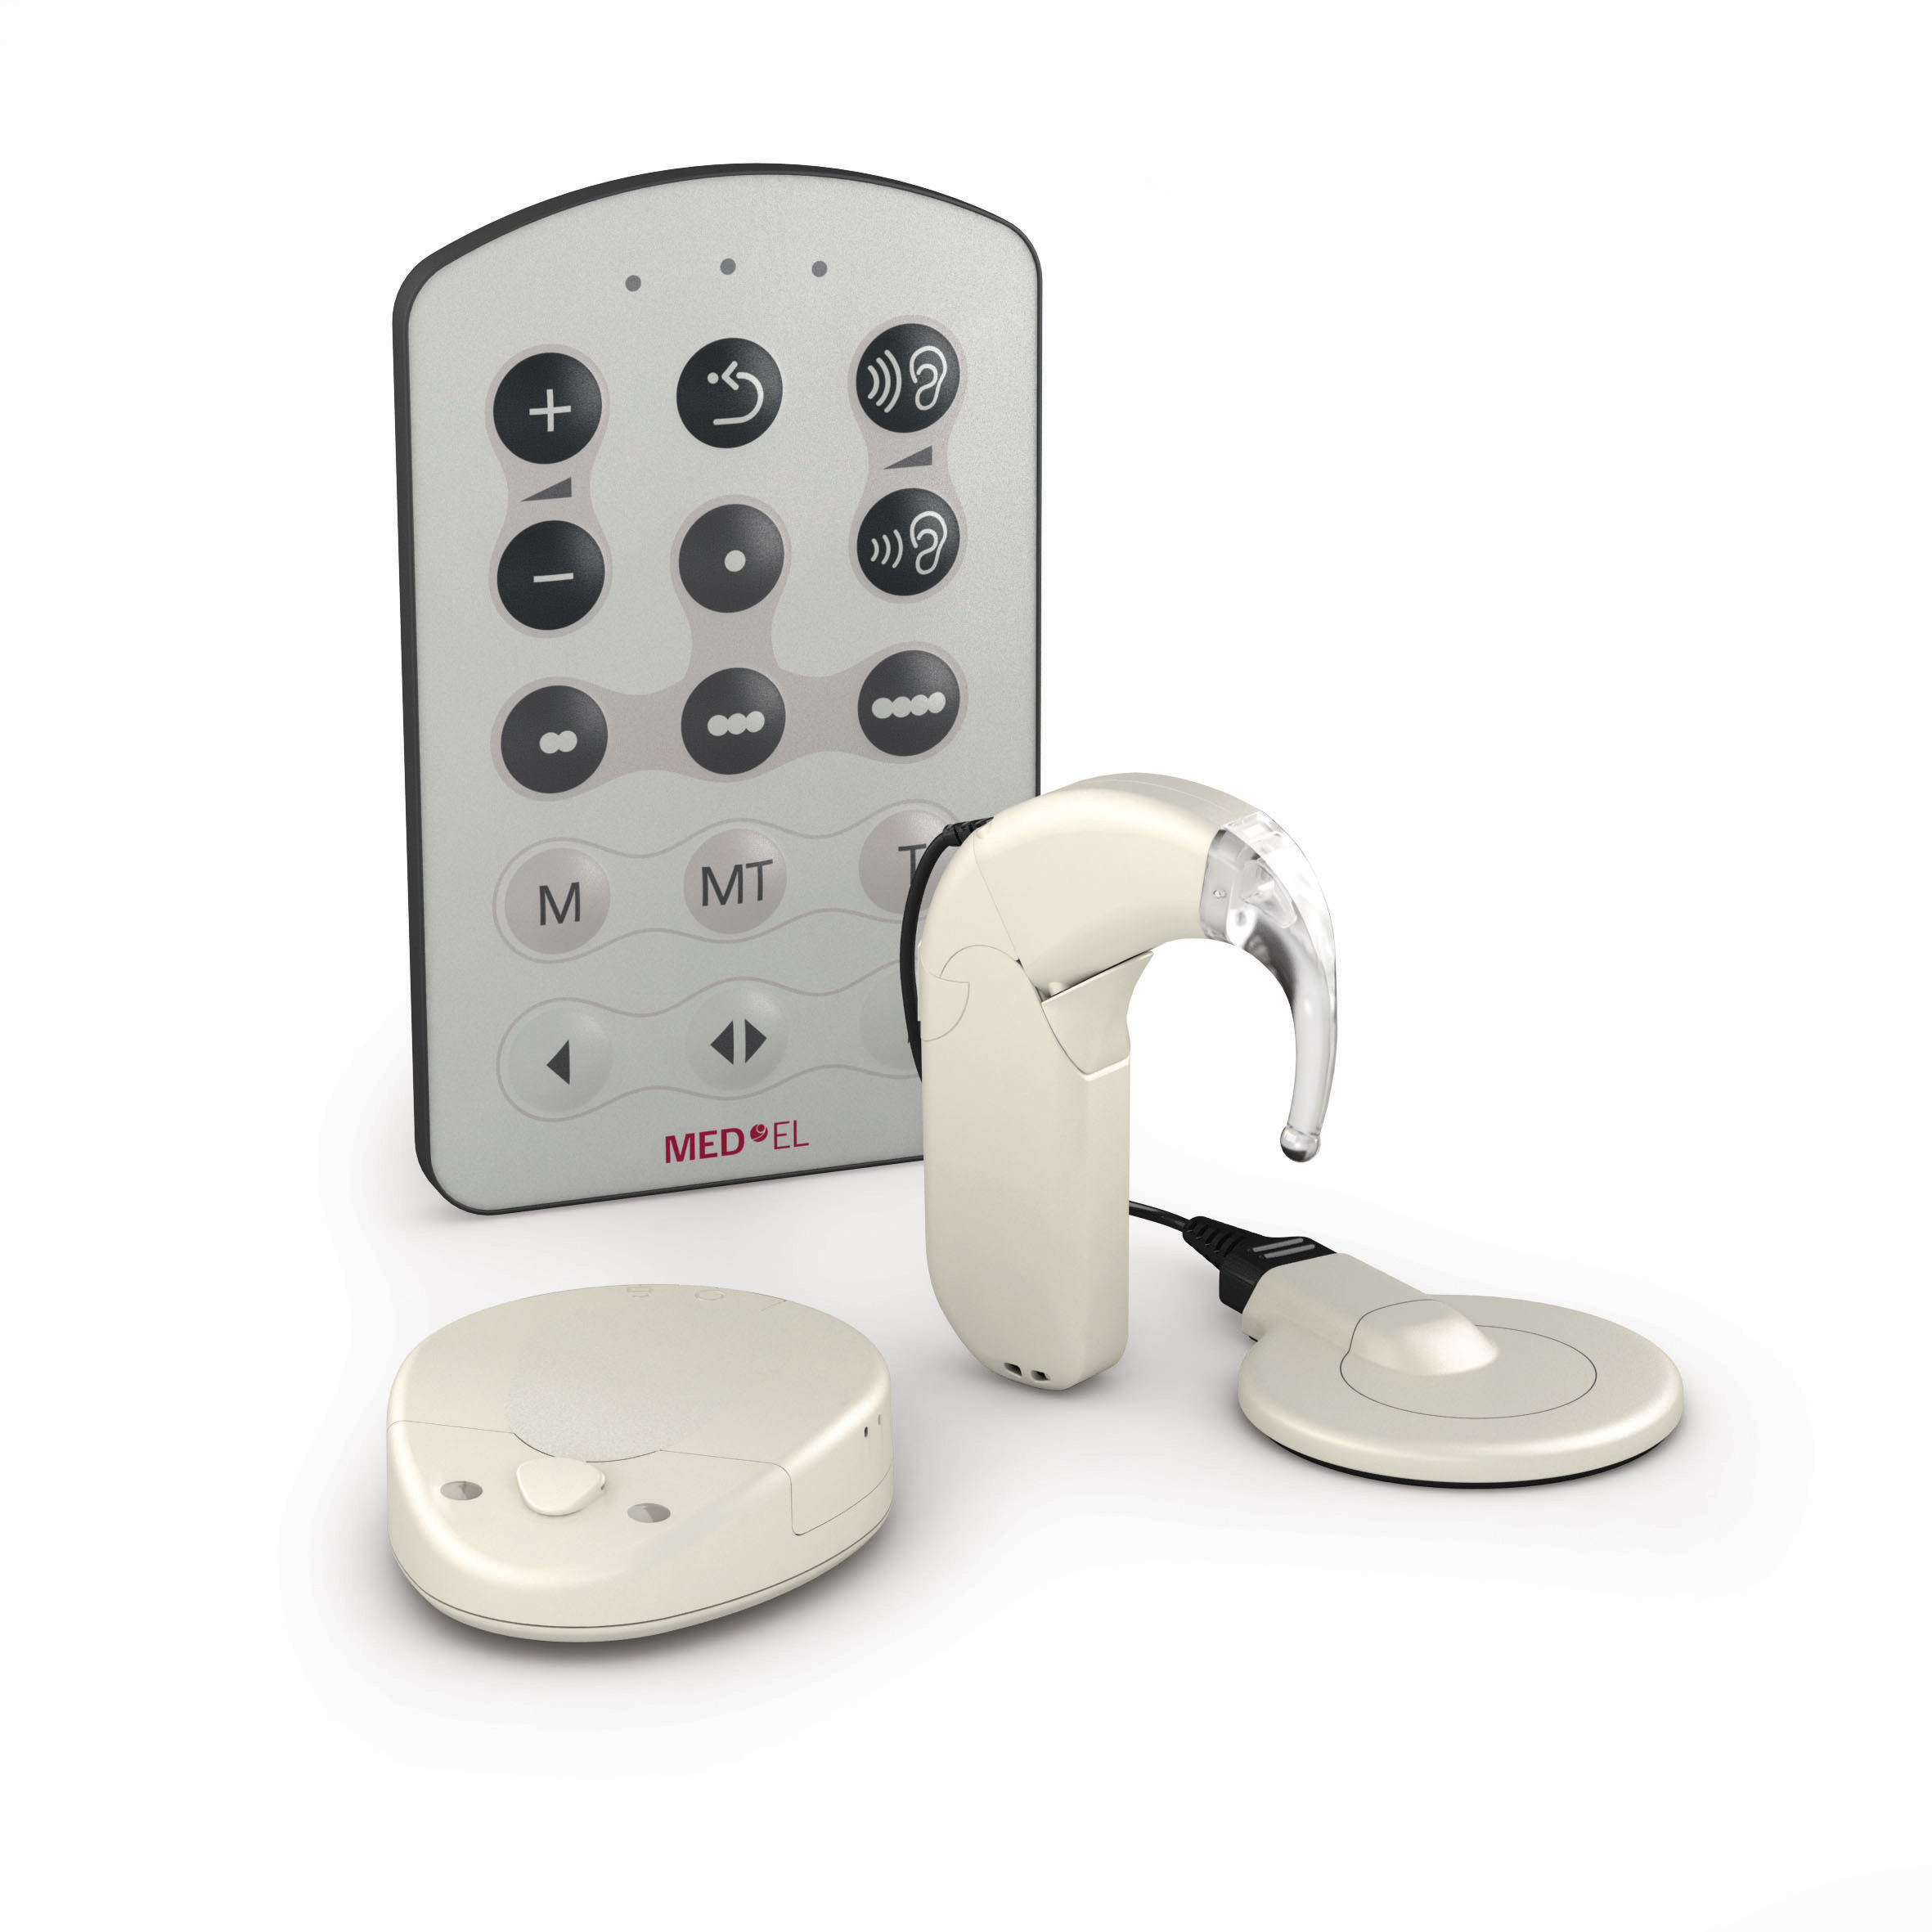 MED-EL Launches World's First Single-Unit Processor for Cochlear Implants